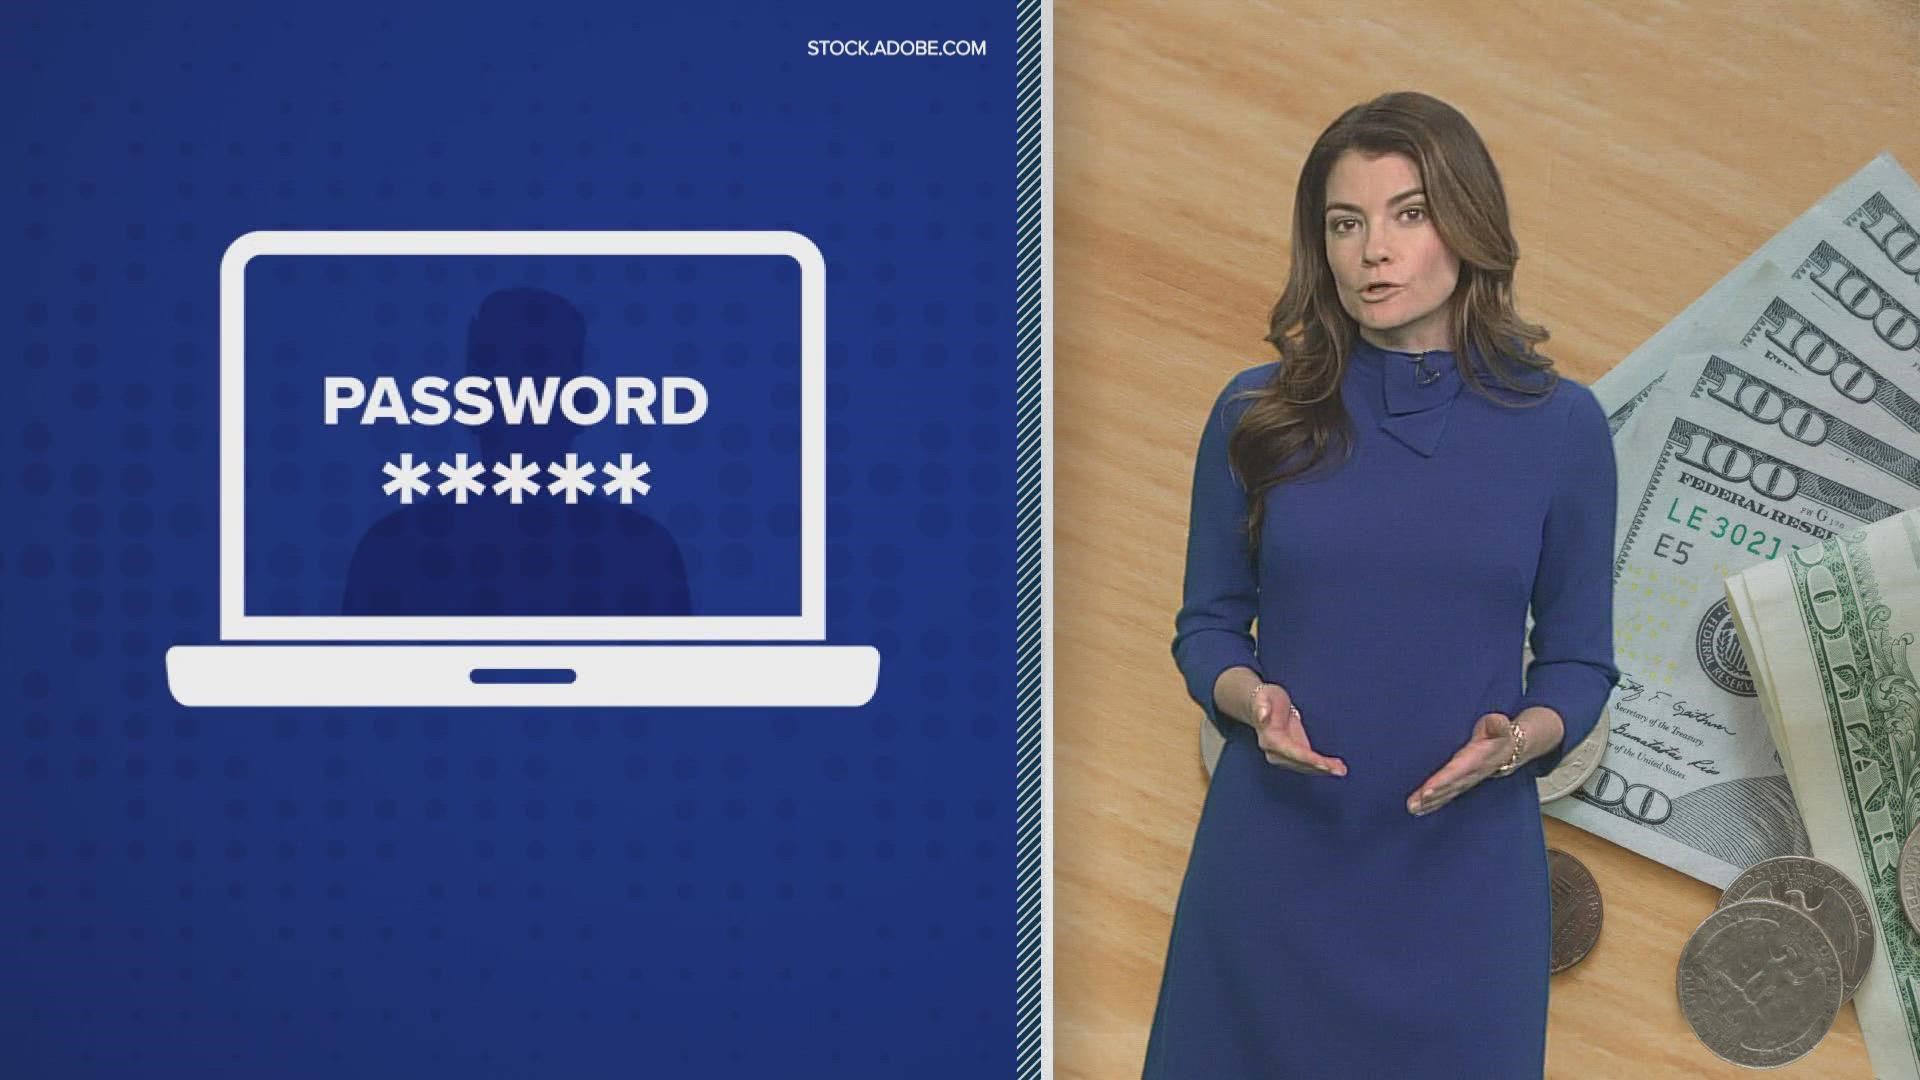 Allison Gormly has some security tips to help keep you safe online heading into the New Year.